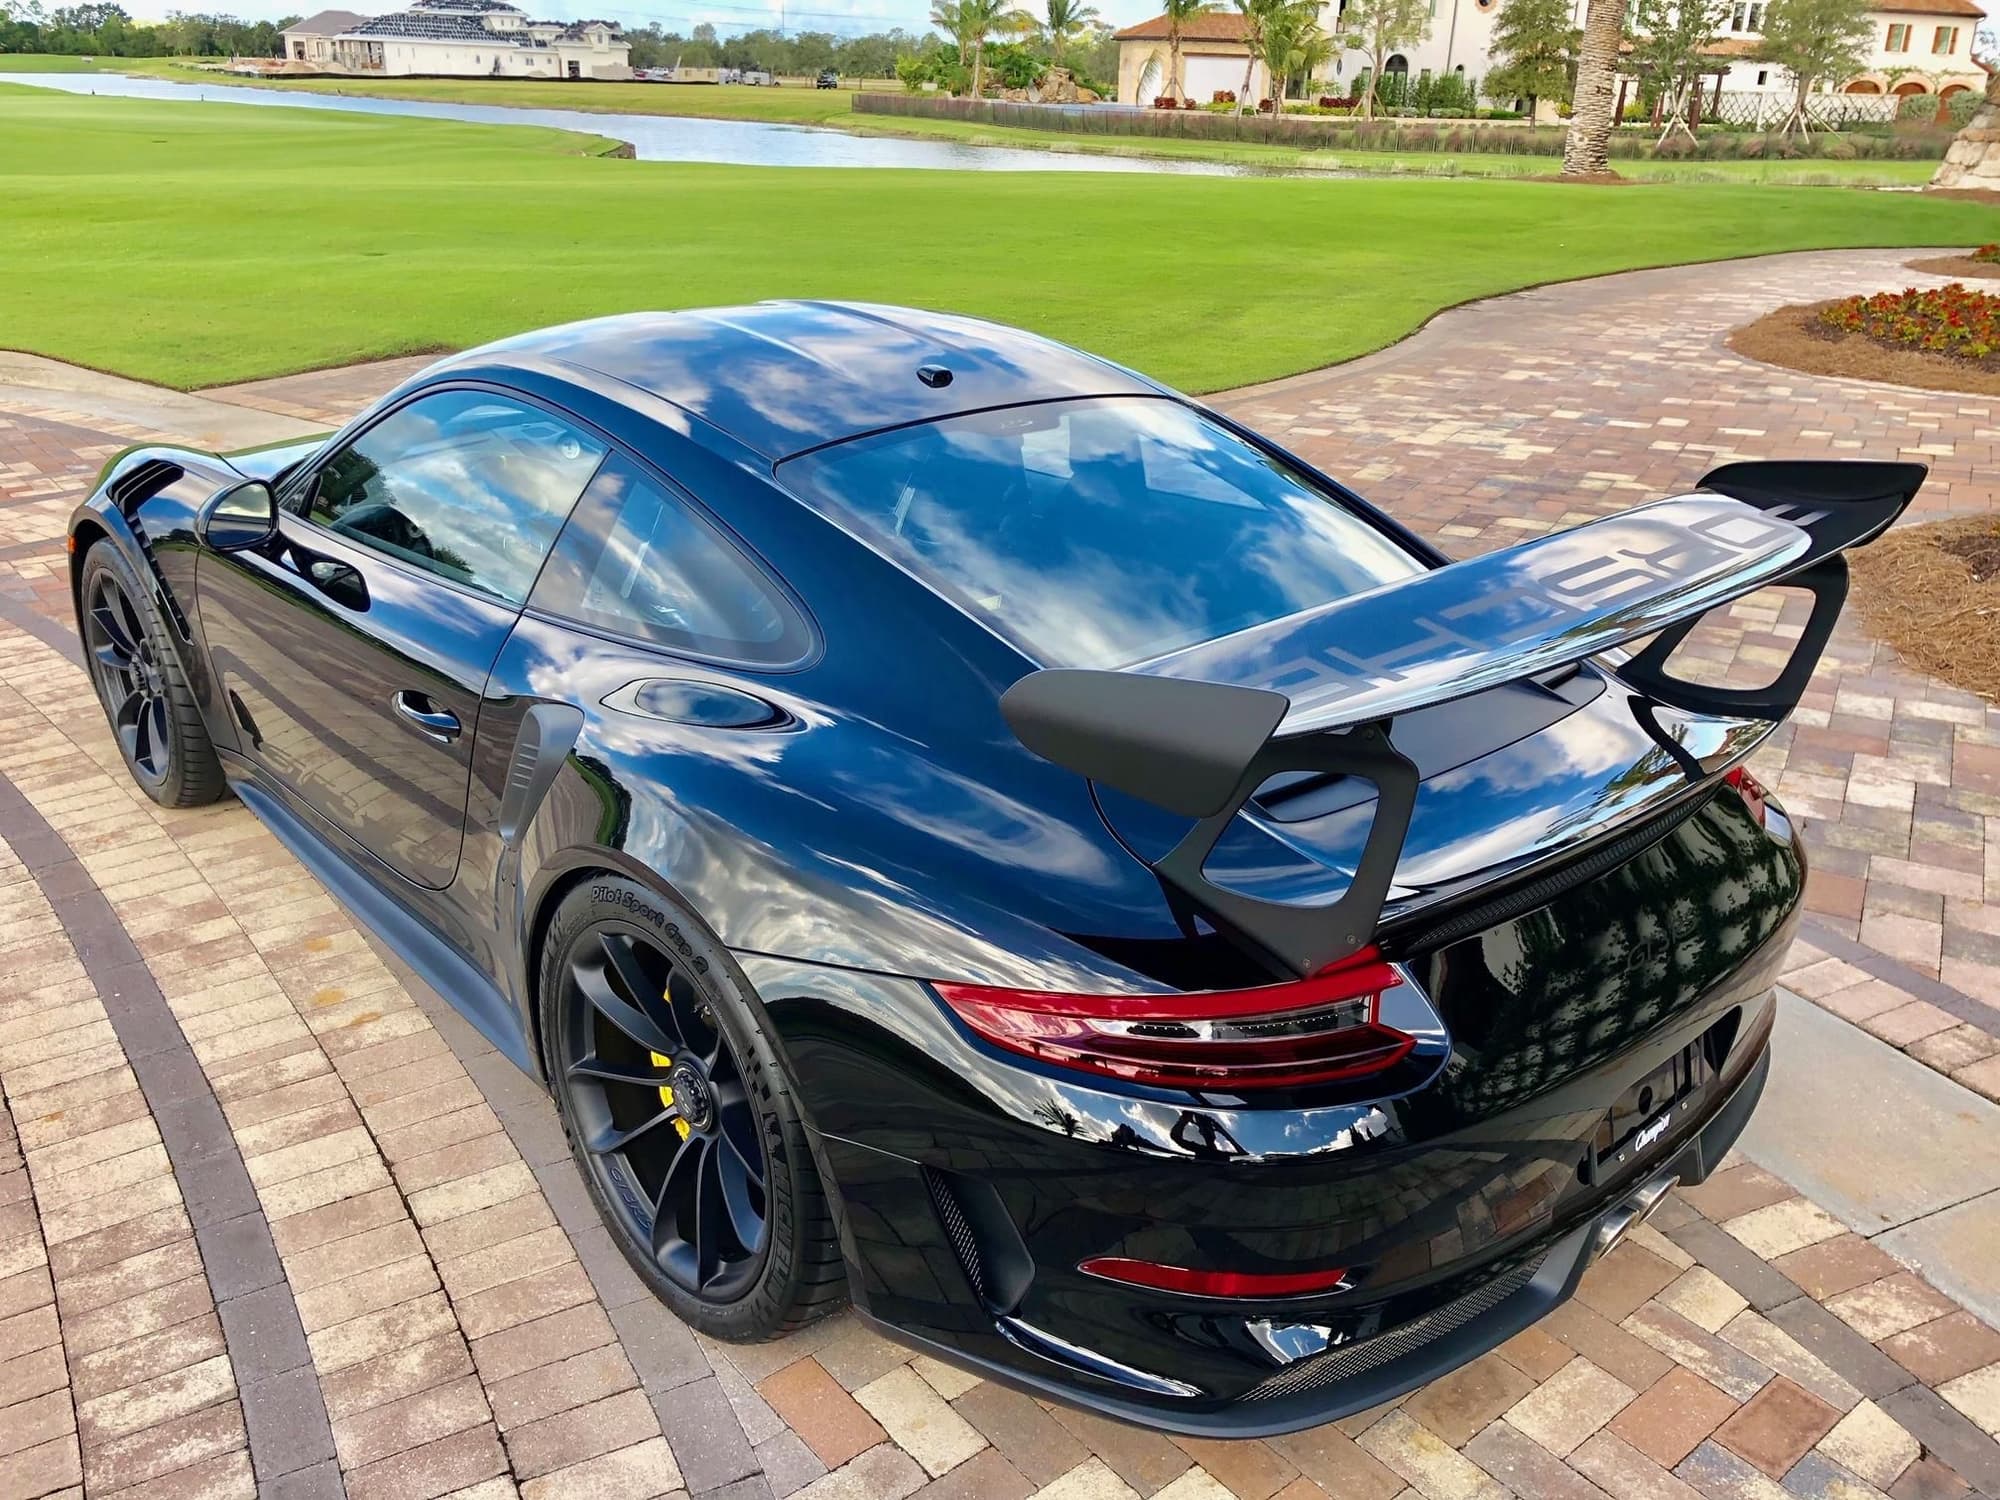 2019 Porsche GT3 - 2019 Porsche 911 GT3 RS (Weissach Package) - New - VIN WP0AF2A99KS164592 - 16 Miles - 6 cyl - 2WD - Automatic - Coupe - Black - Fort Lauderdale, FL 33311, United States